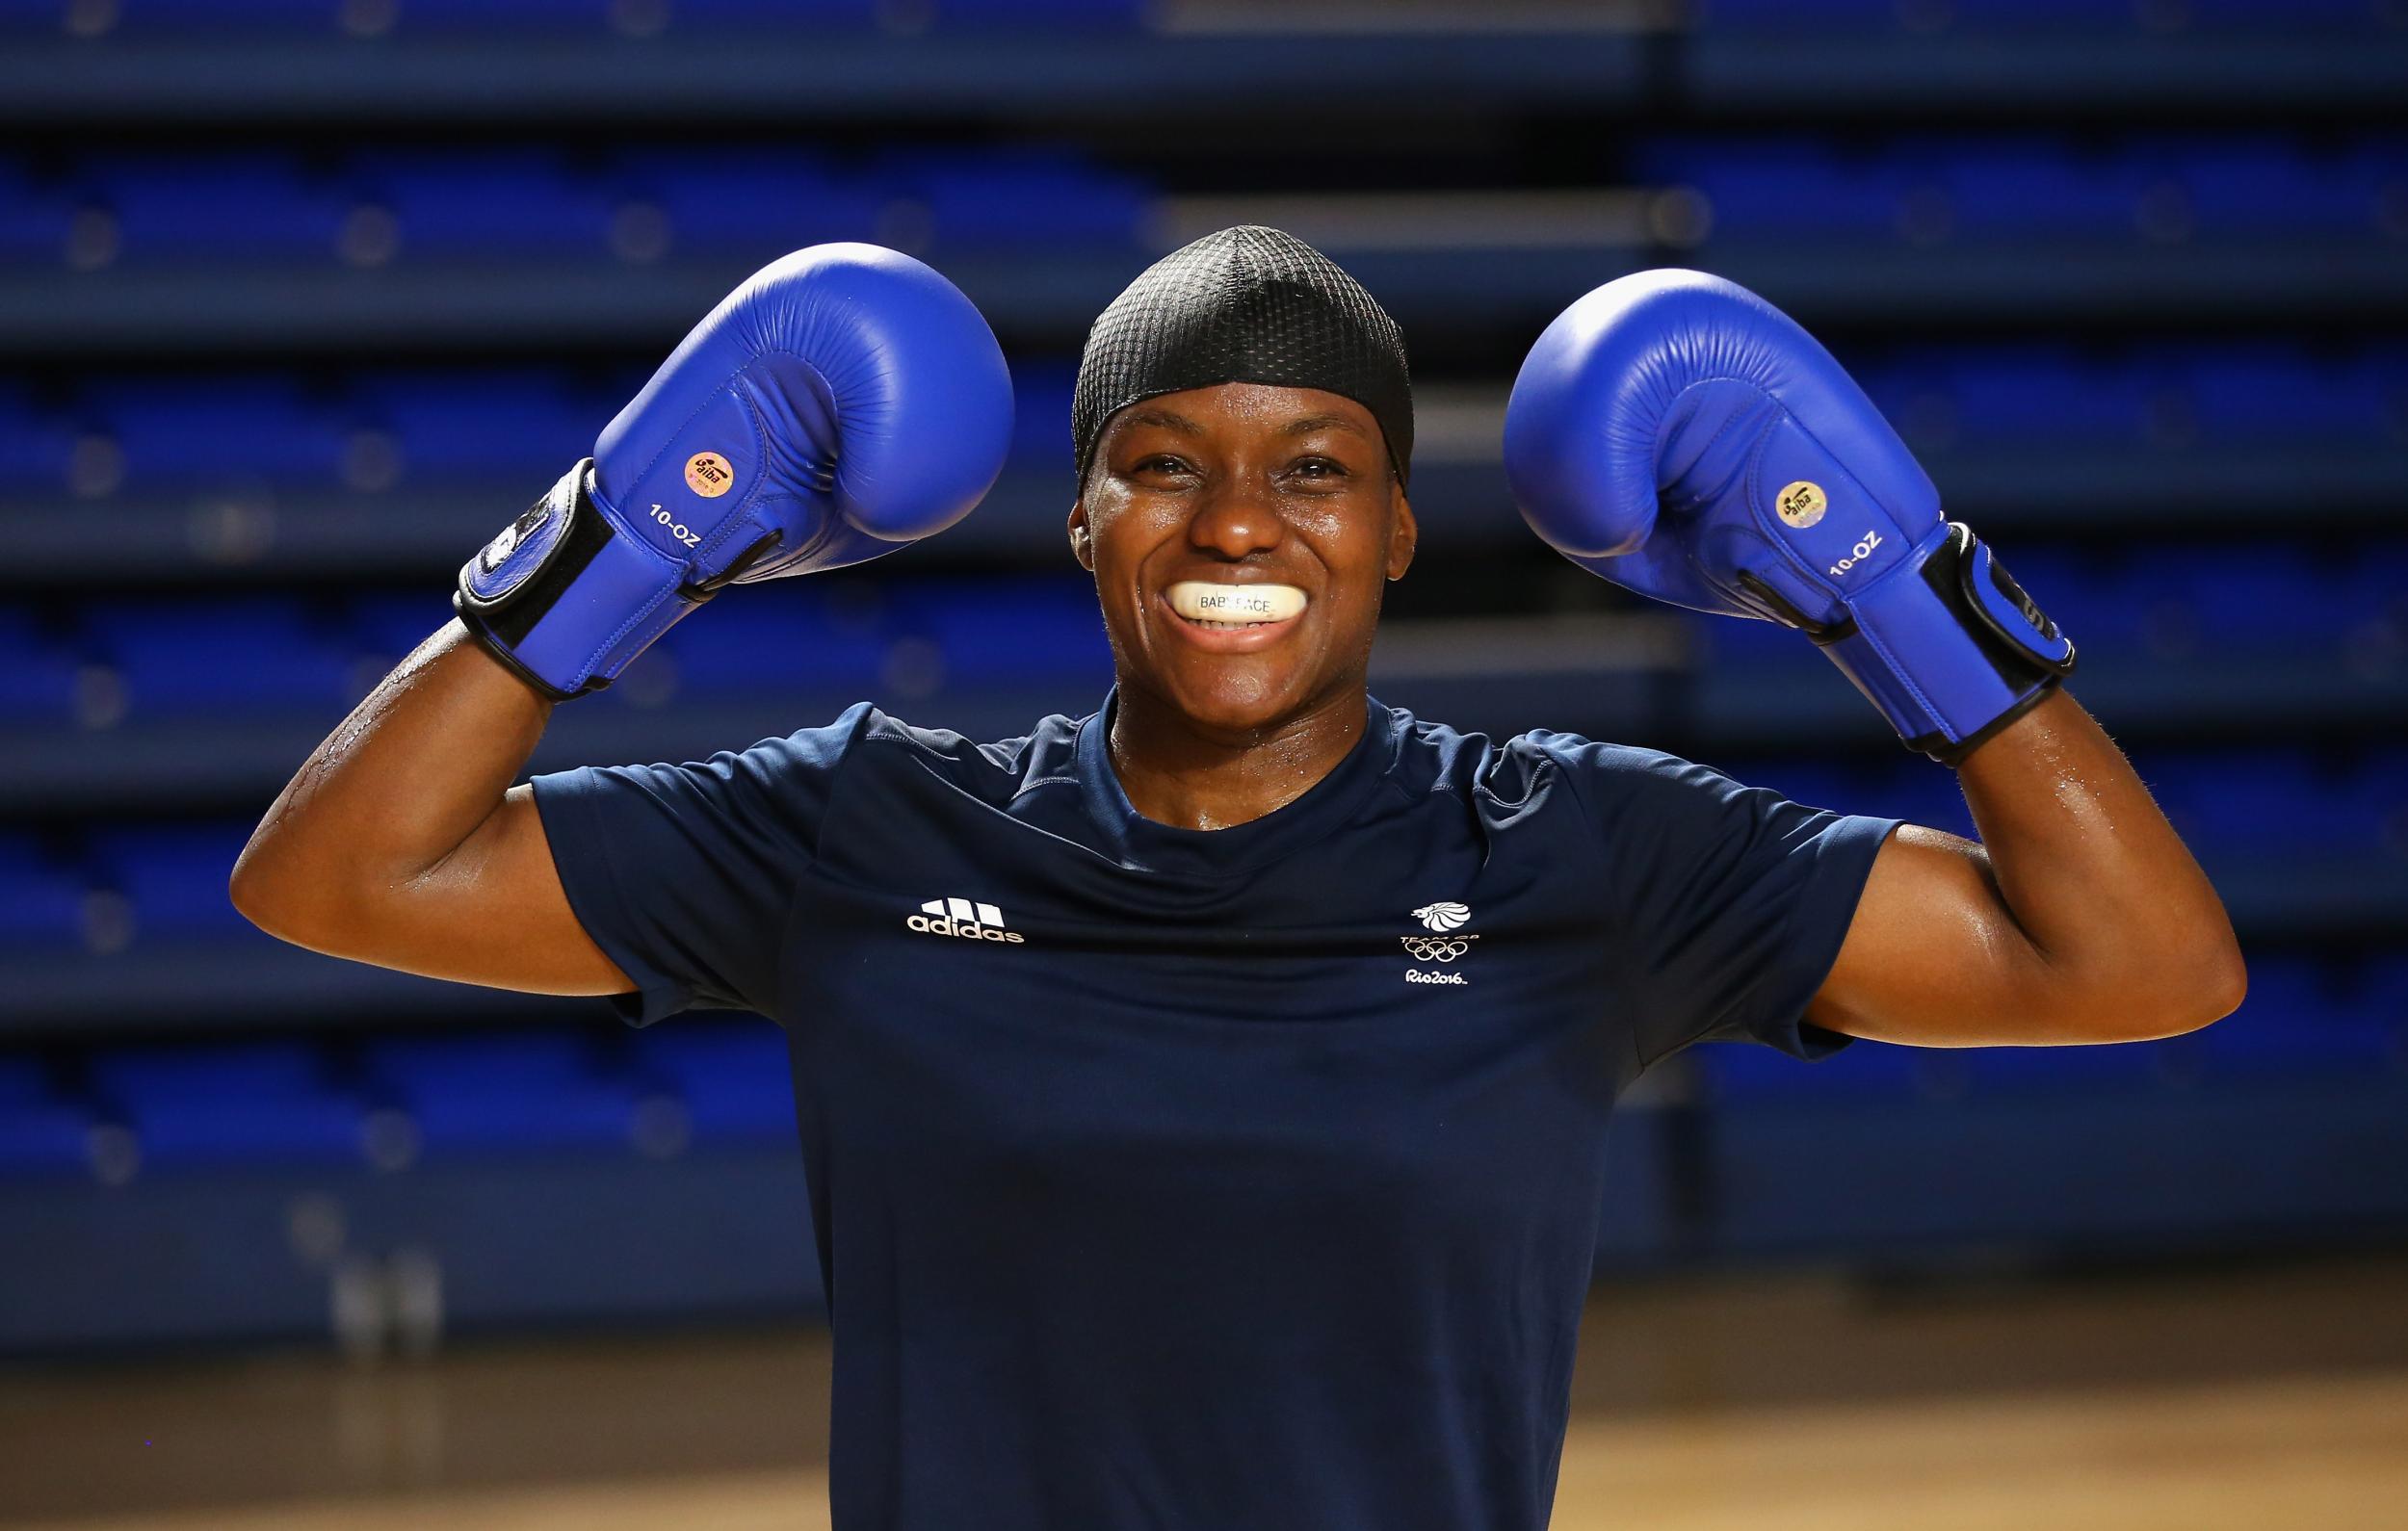 Rio 2016 Nicola Adams looks to make history as she prepares for 2012 title defence at Olympic Games The Independent The Independent hq photo